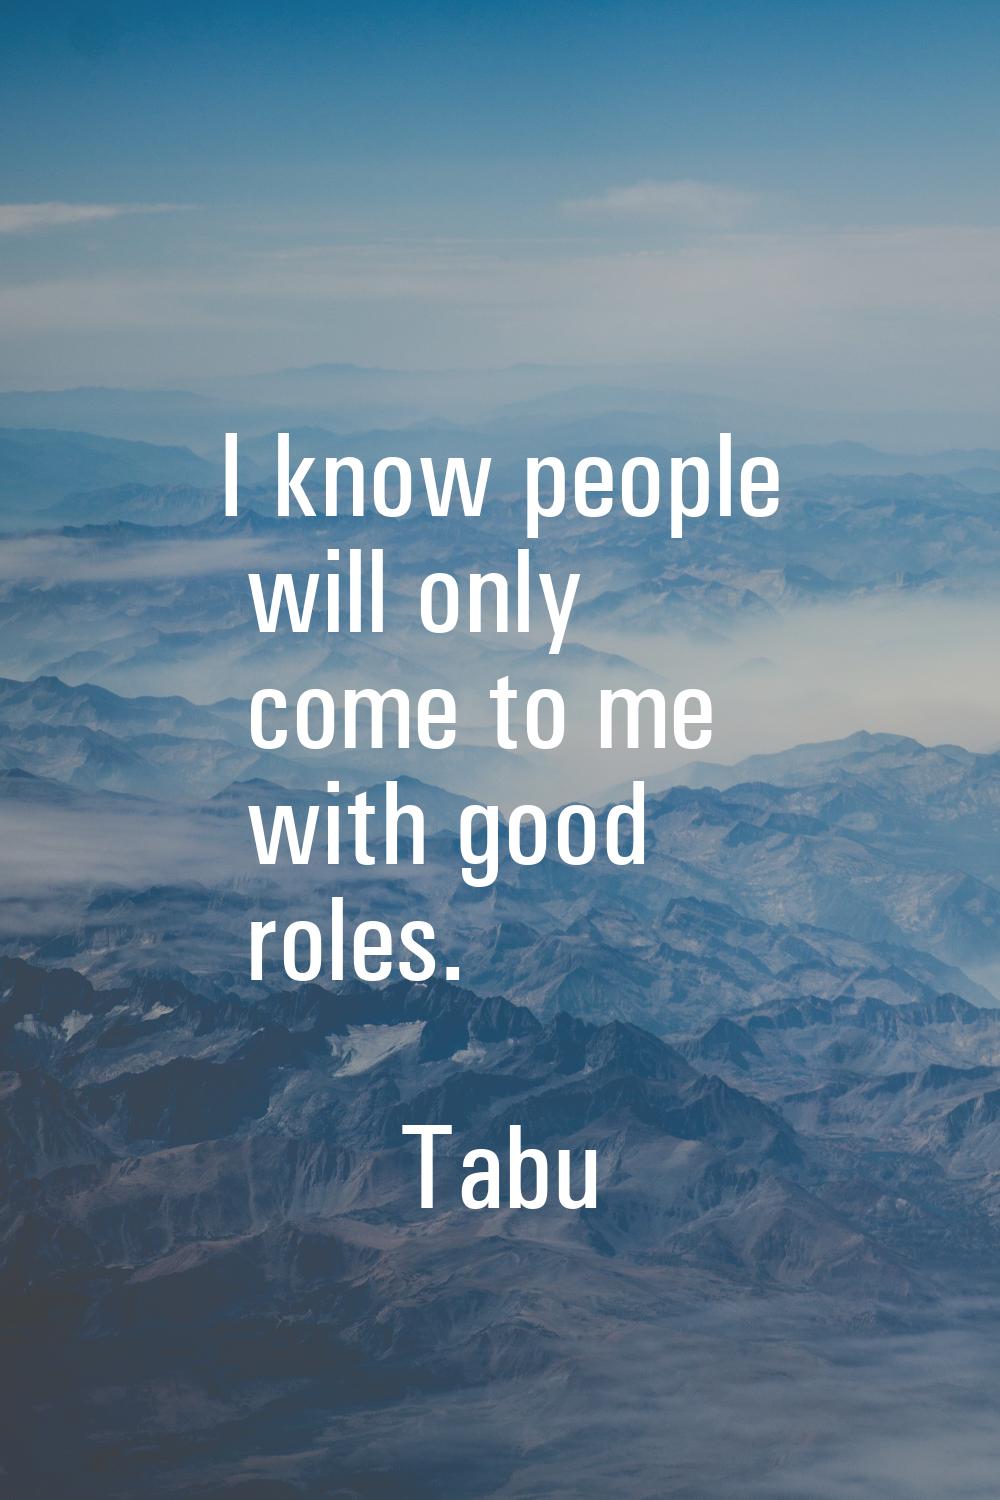 I know people will only come to me with good roles.